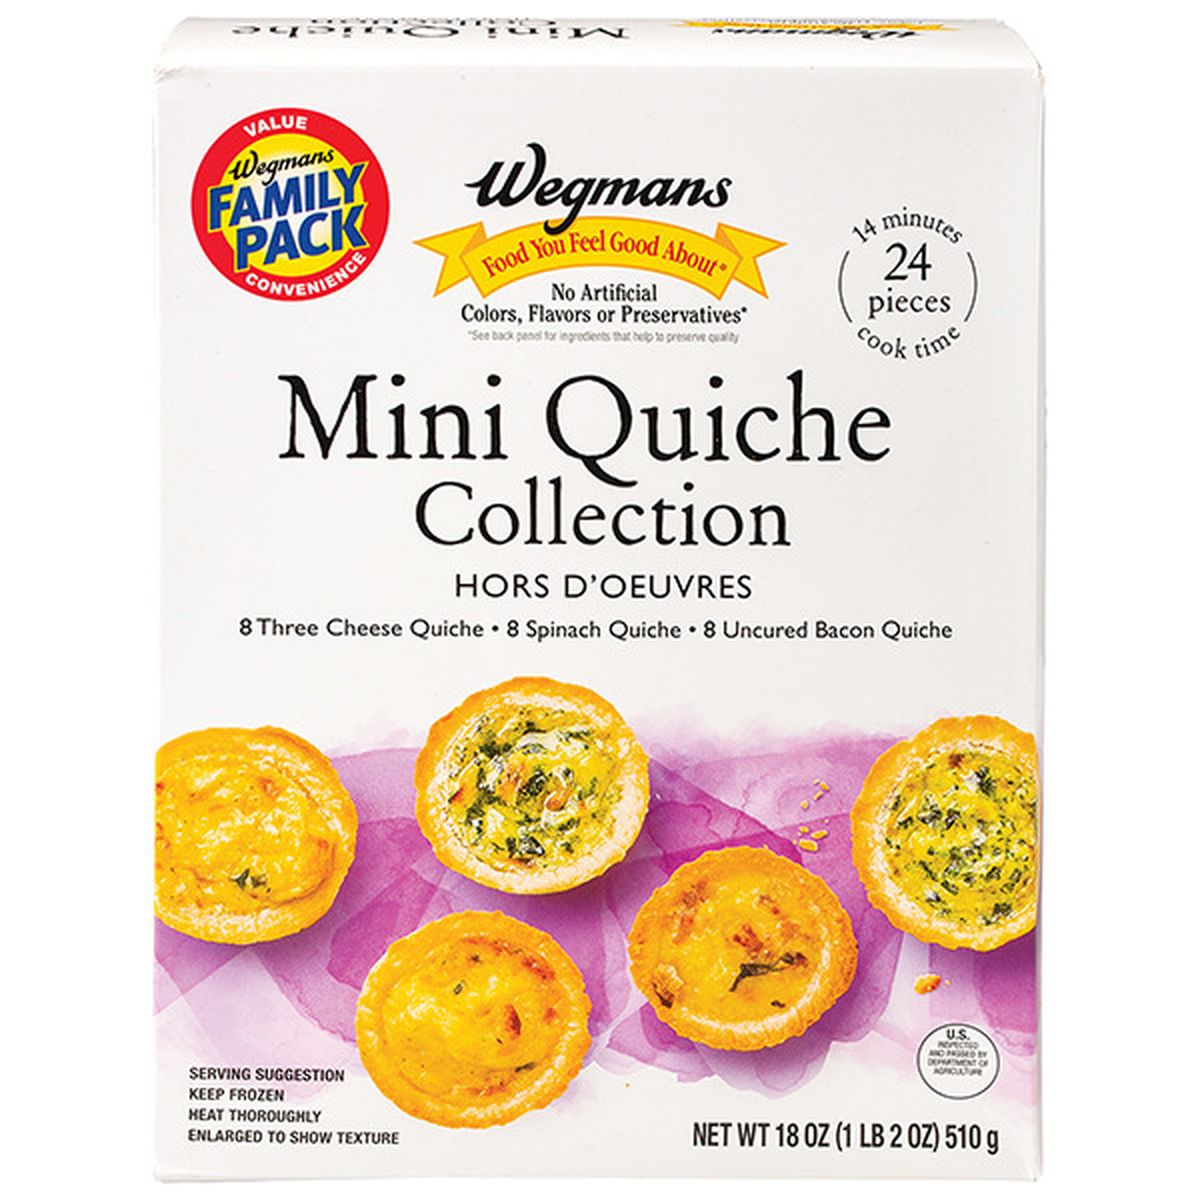 Calories in Wegmans Mini Quiche Collection, FAMILY PACK